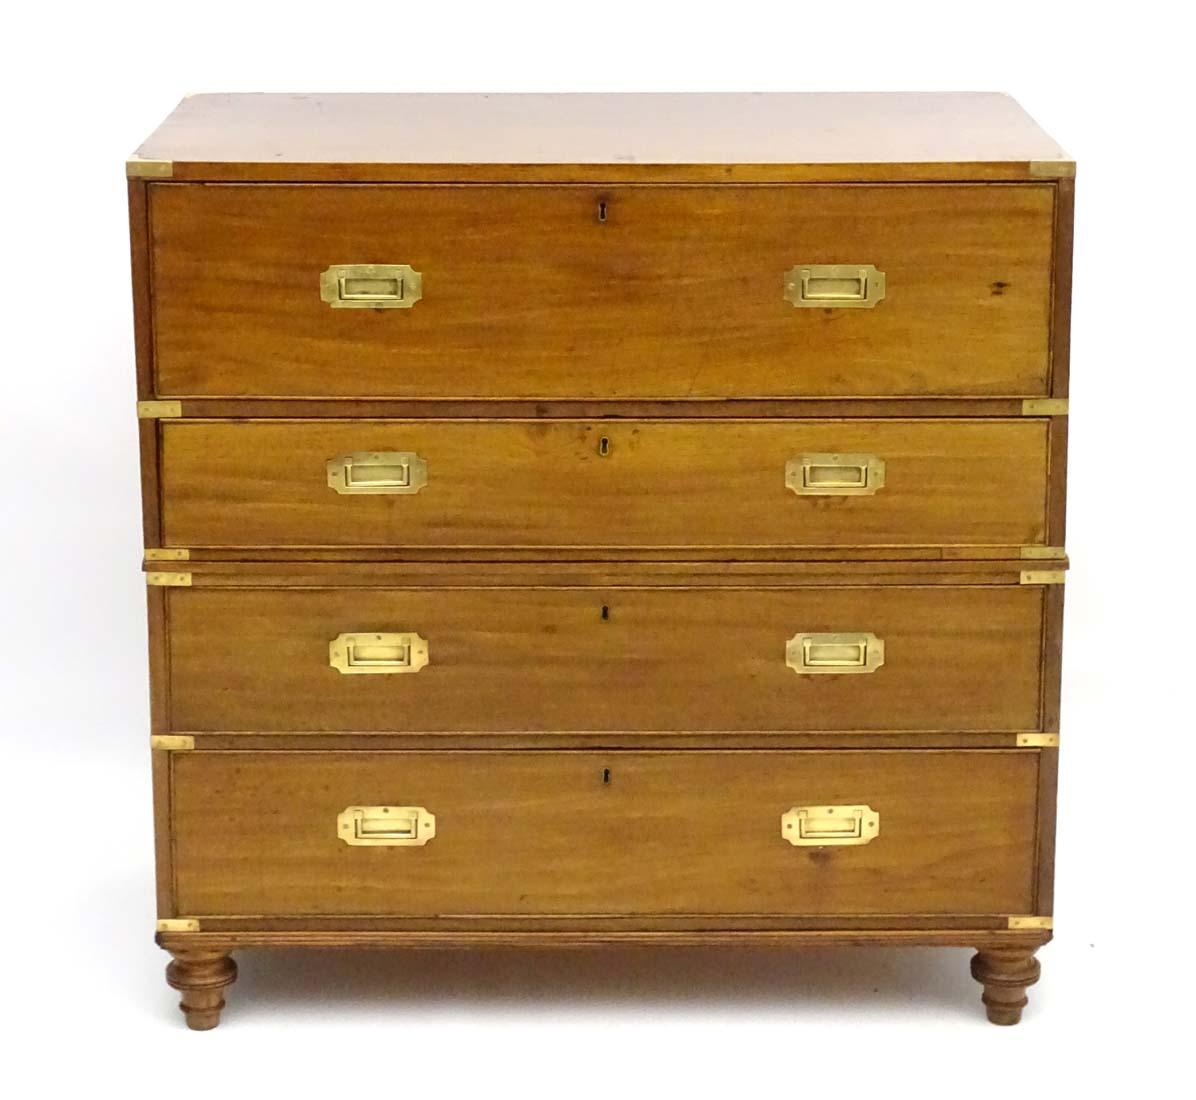 Gillows of Lancaster Campaign Chest of Drawers Secretaire Antique, circa 1850 (Mahagoni)